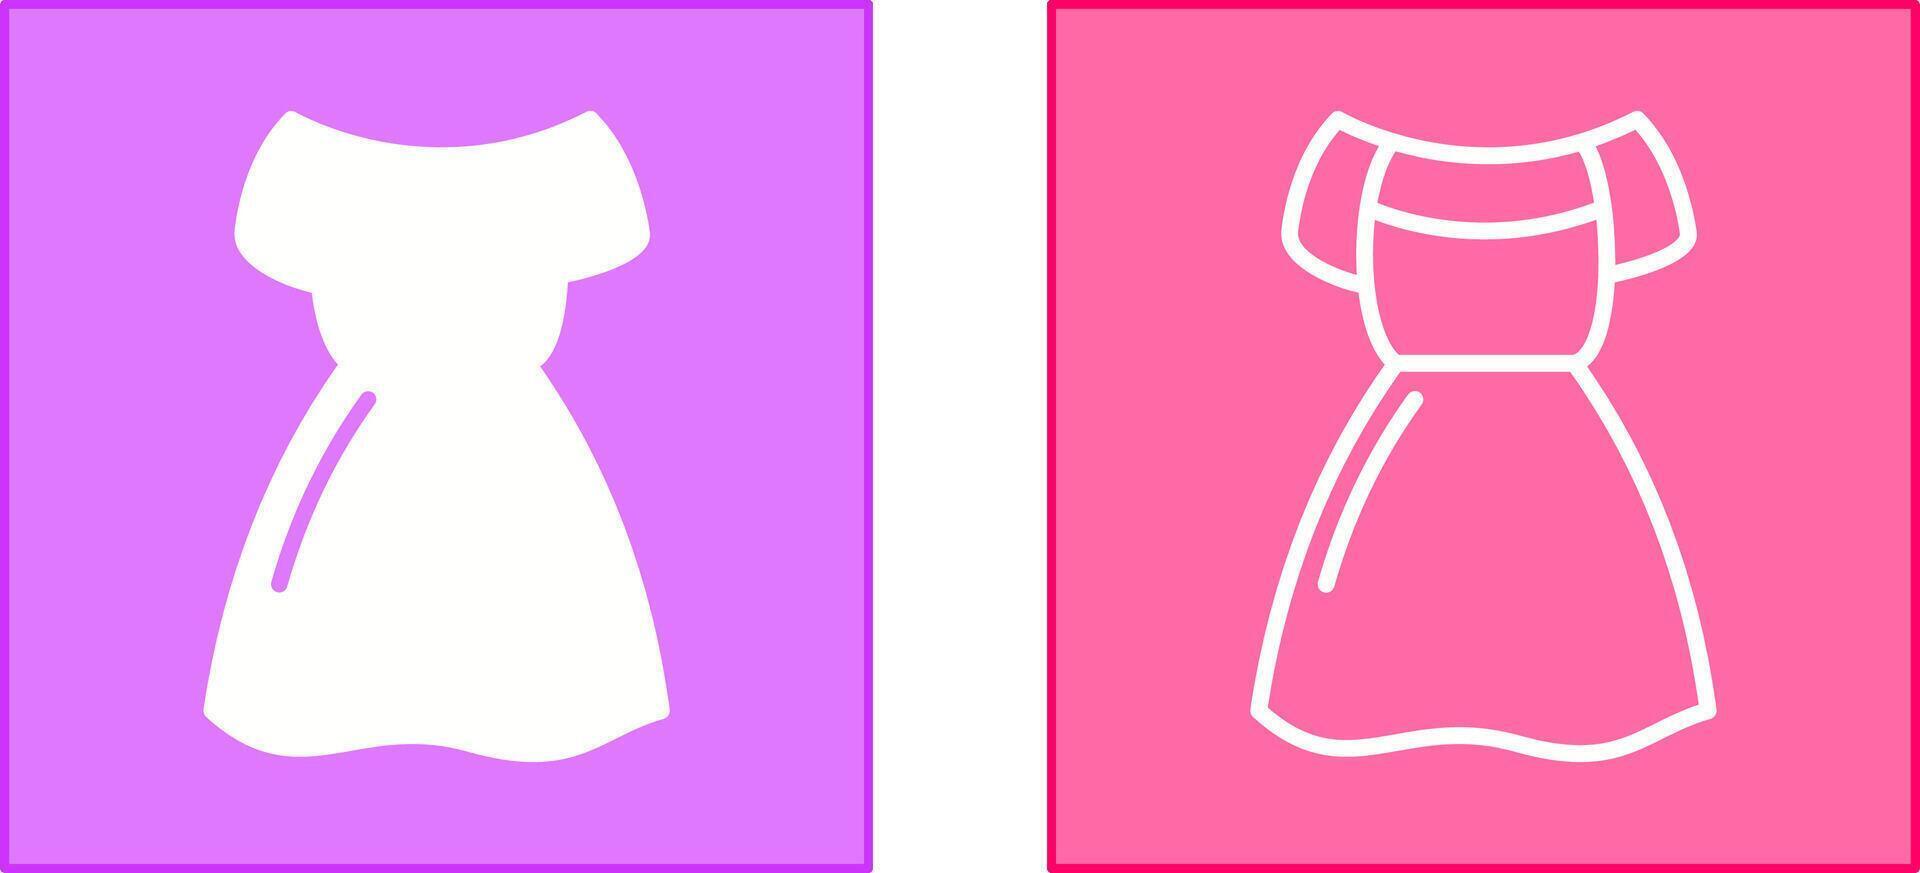 Party Dress Icon vector